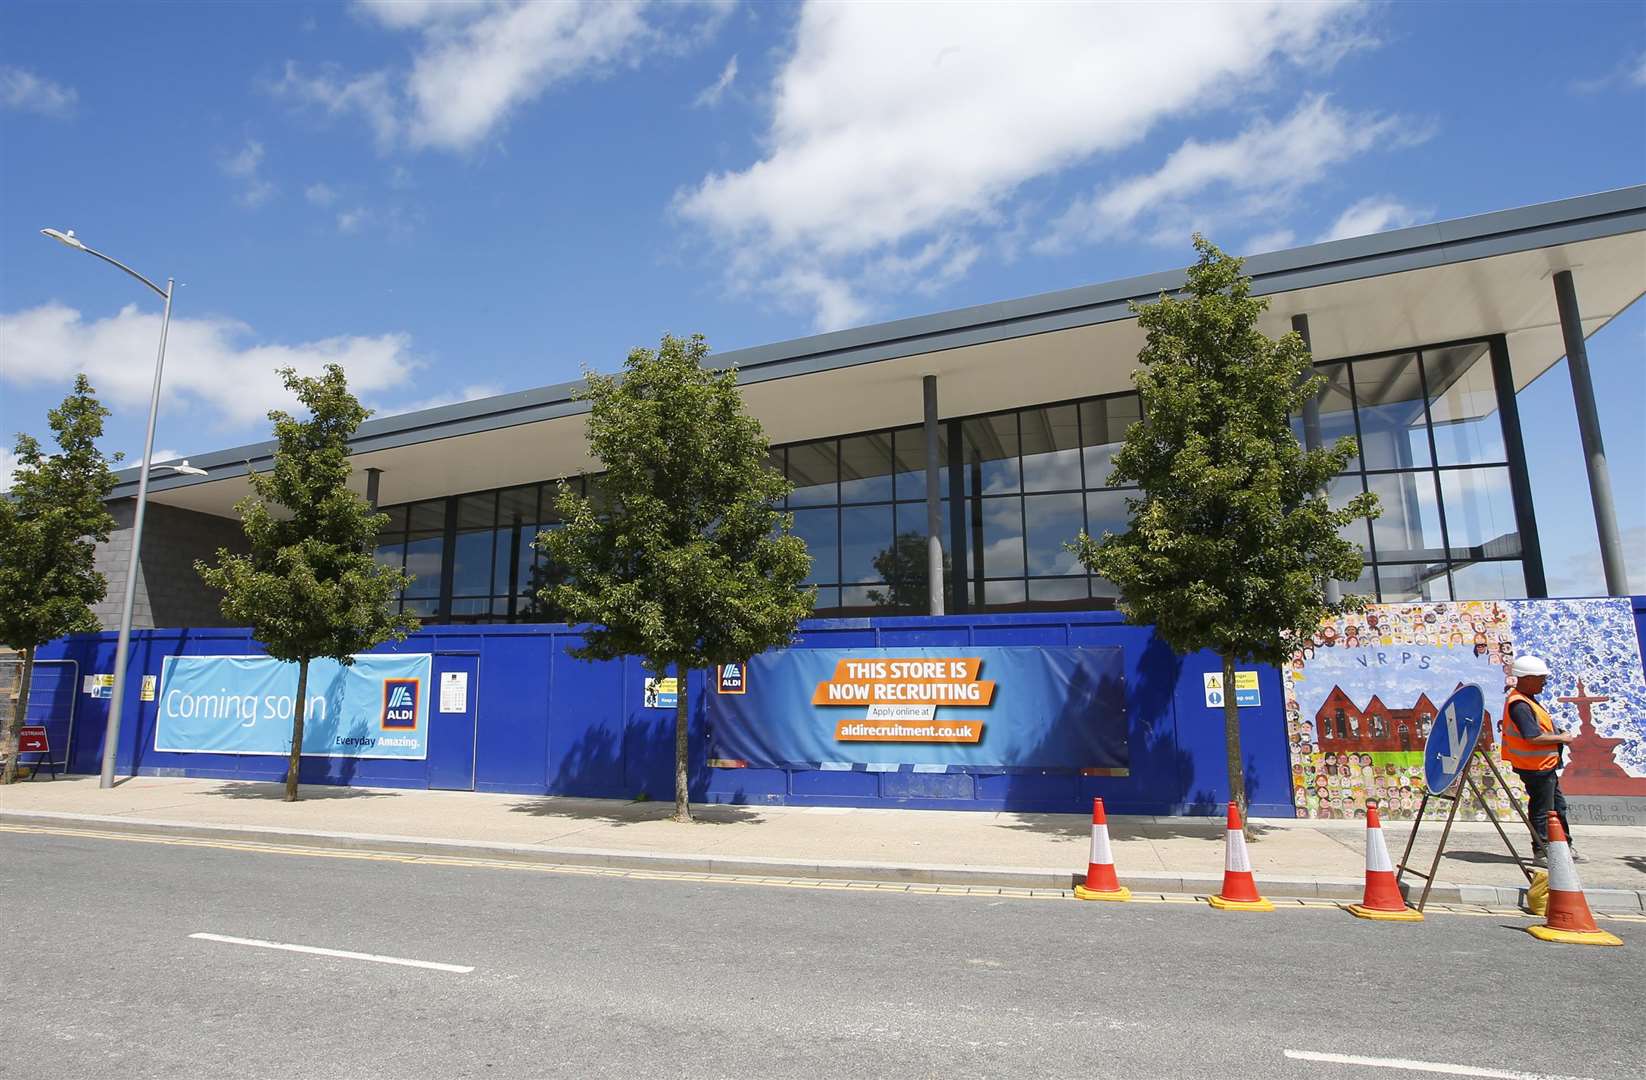 The new Aldi store is almost ready to open